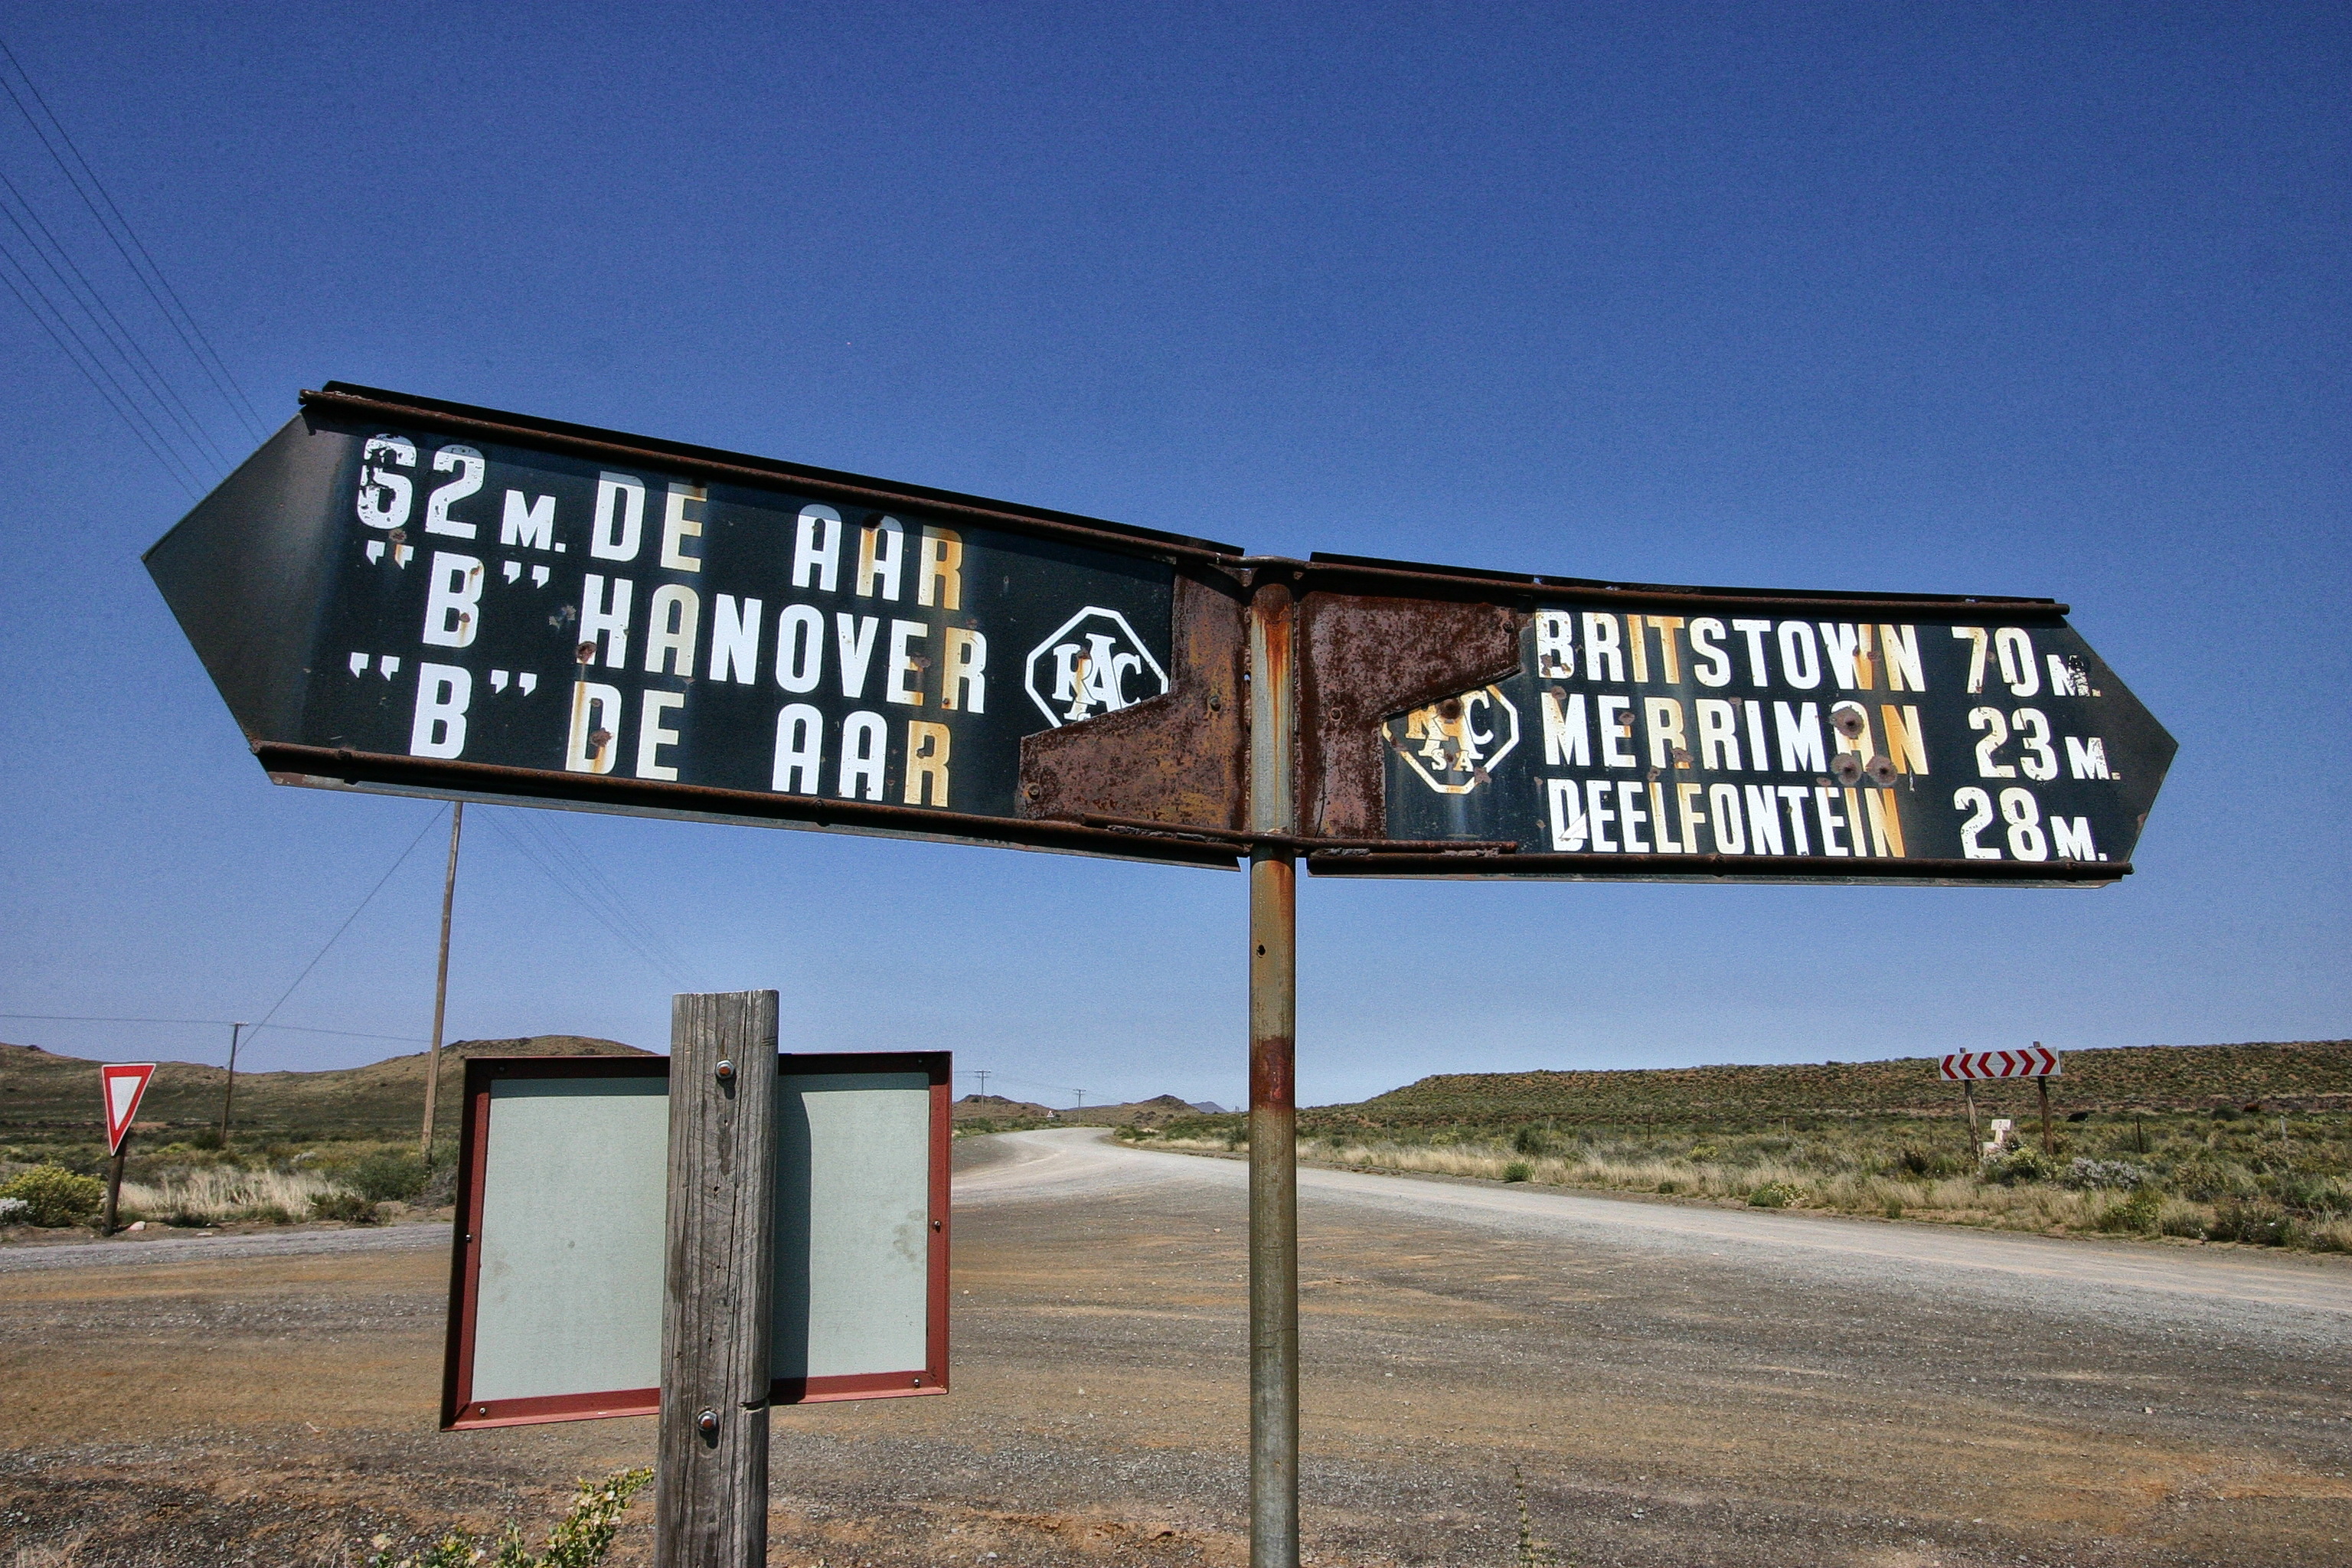 One of the oldest remaining roadsigns in the Karoo – the Deelfontein crossroad.